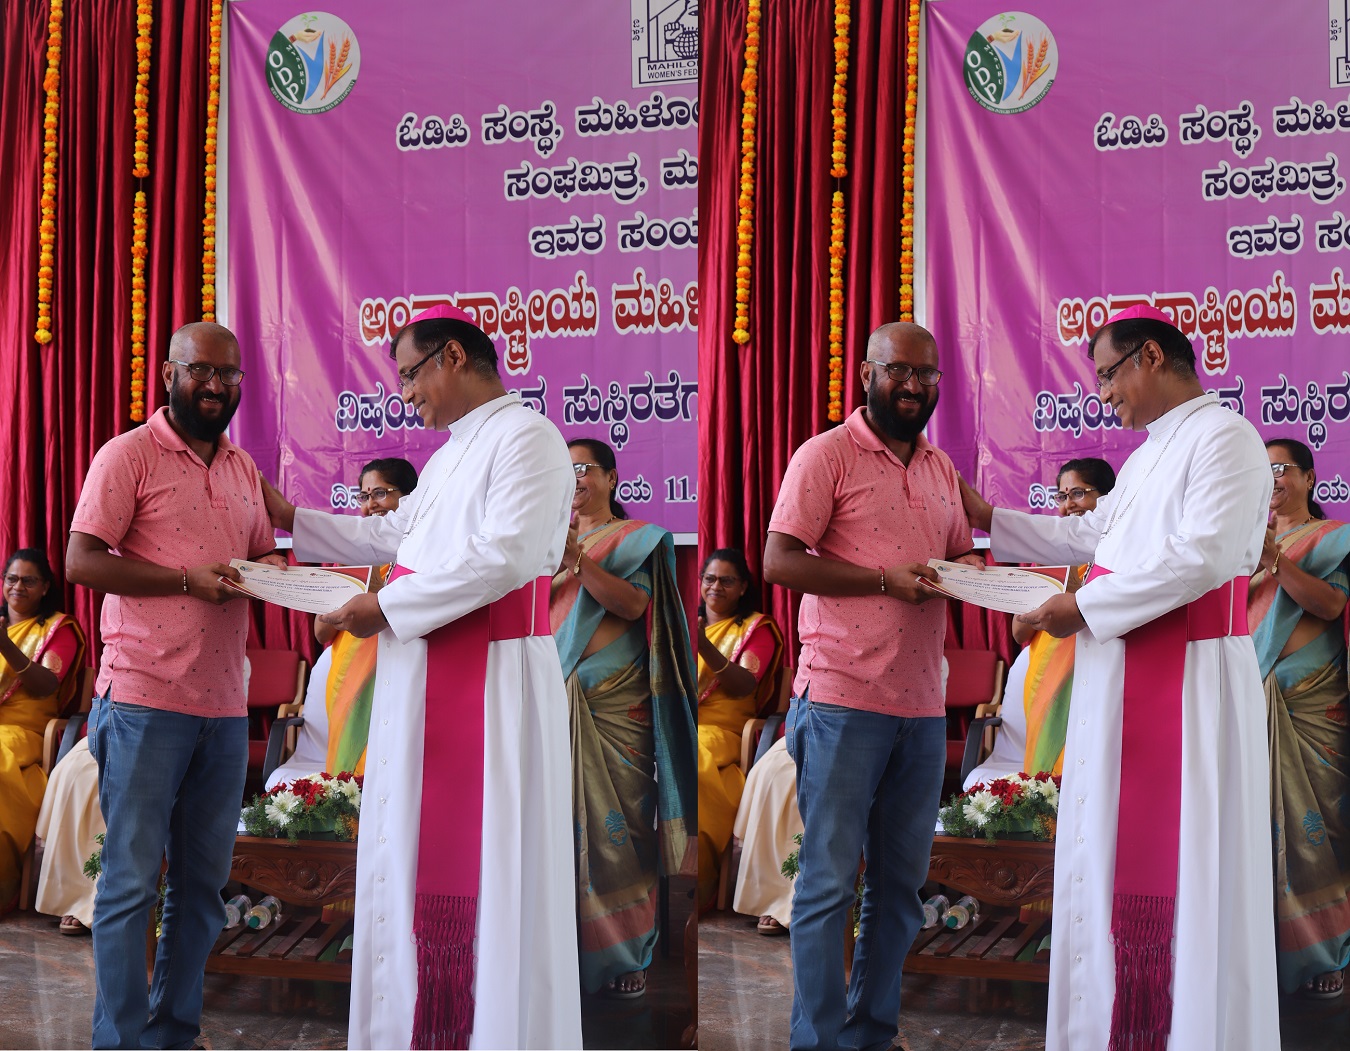 Distribution of certificates to members who donated hair for the cancer patients